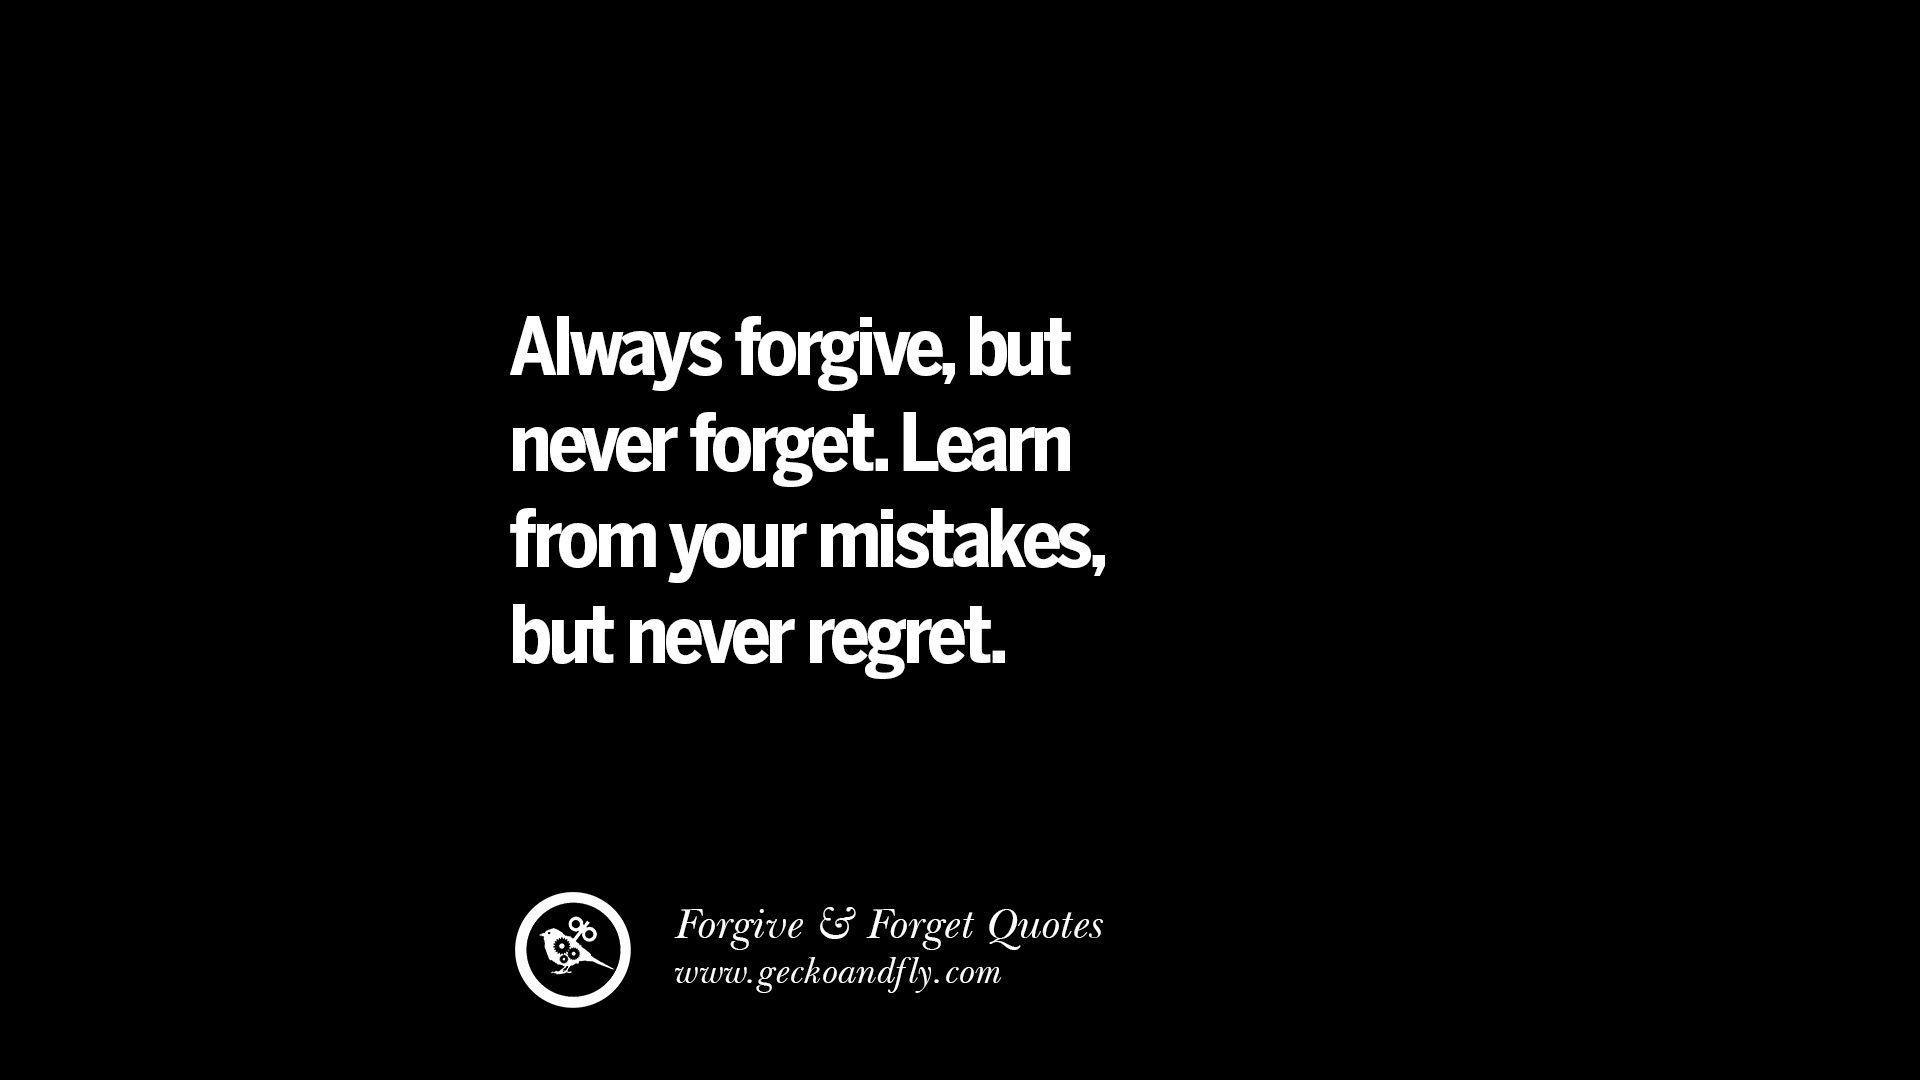 Quotes On Forgive And Forget When Someone Hurts You In A Relationship